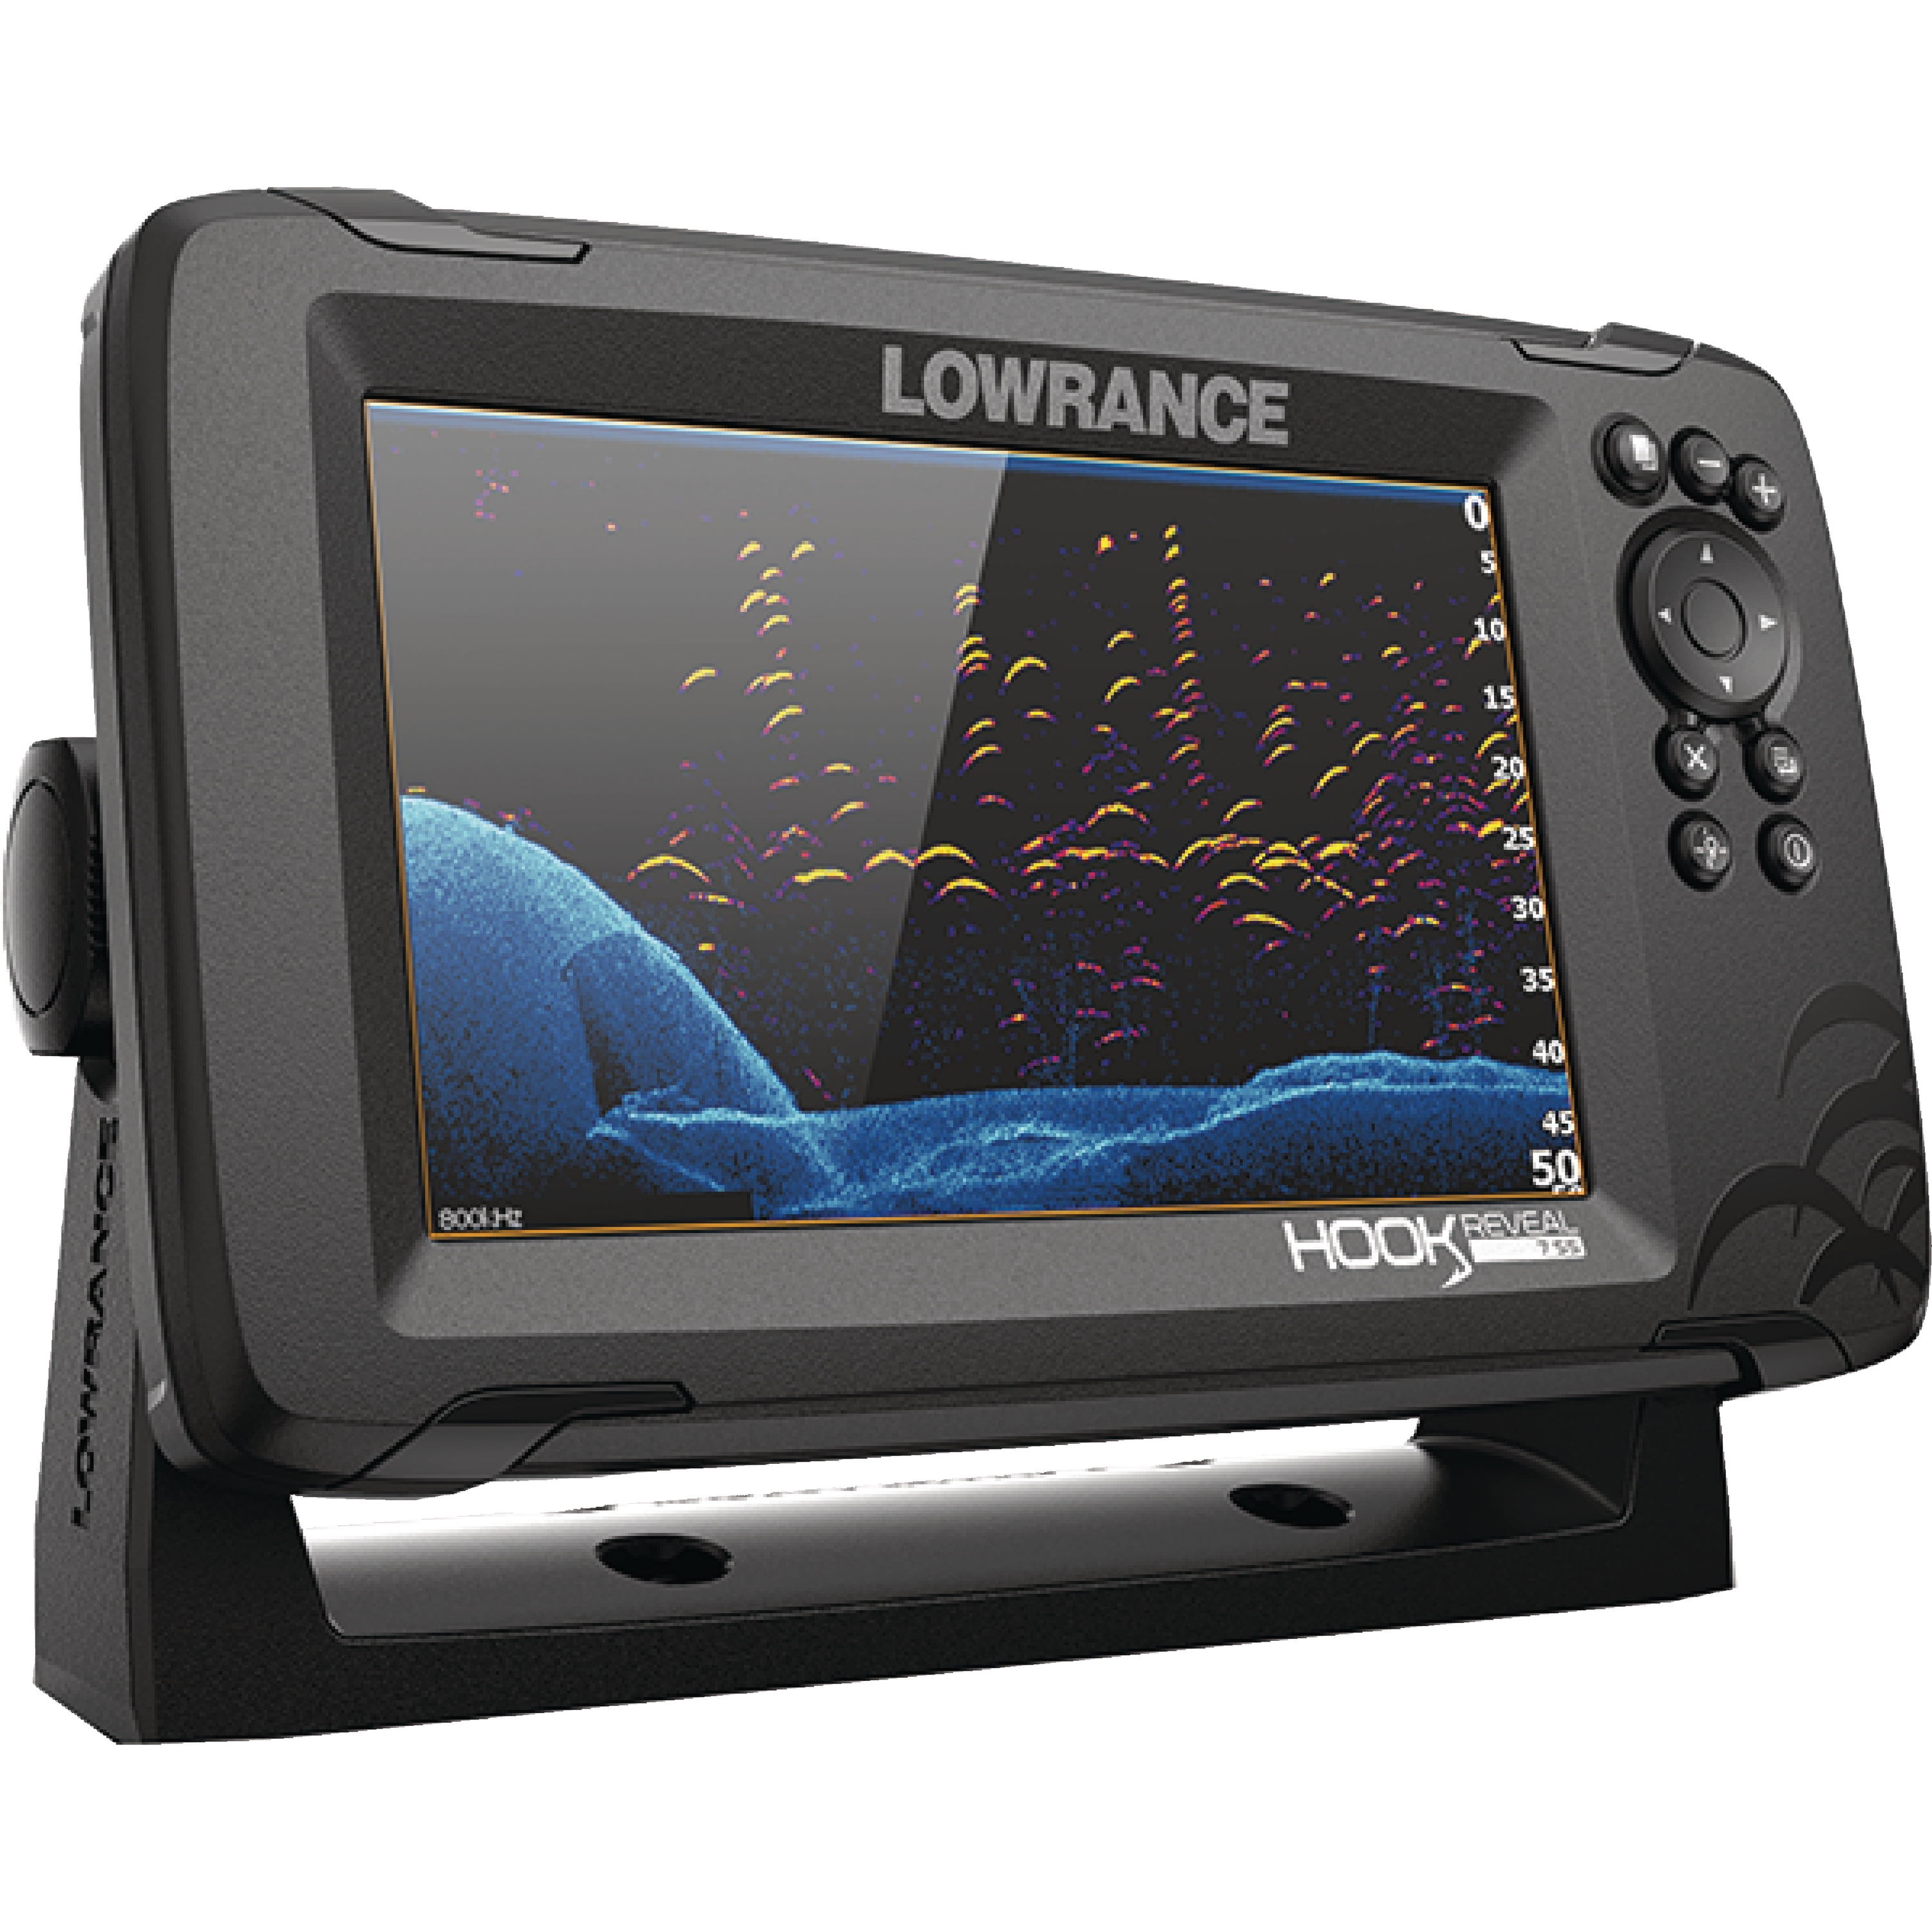 Lowrance Sun Cover Screen Dust Protector Fishfinder Hook2 9" Series for sale online 